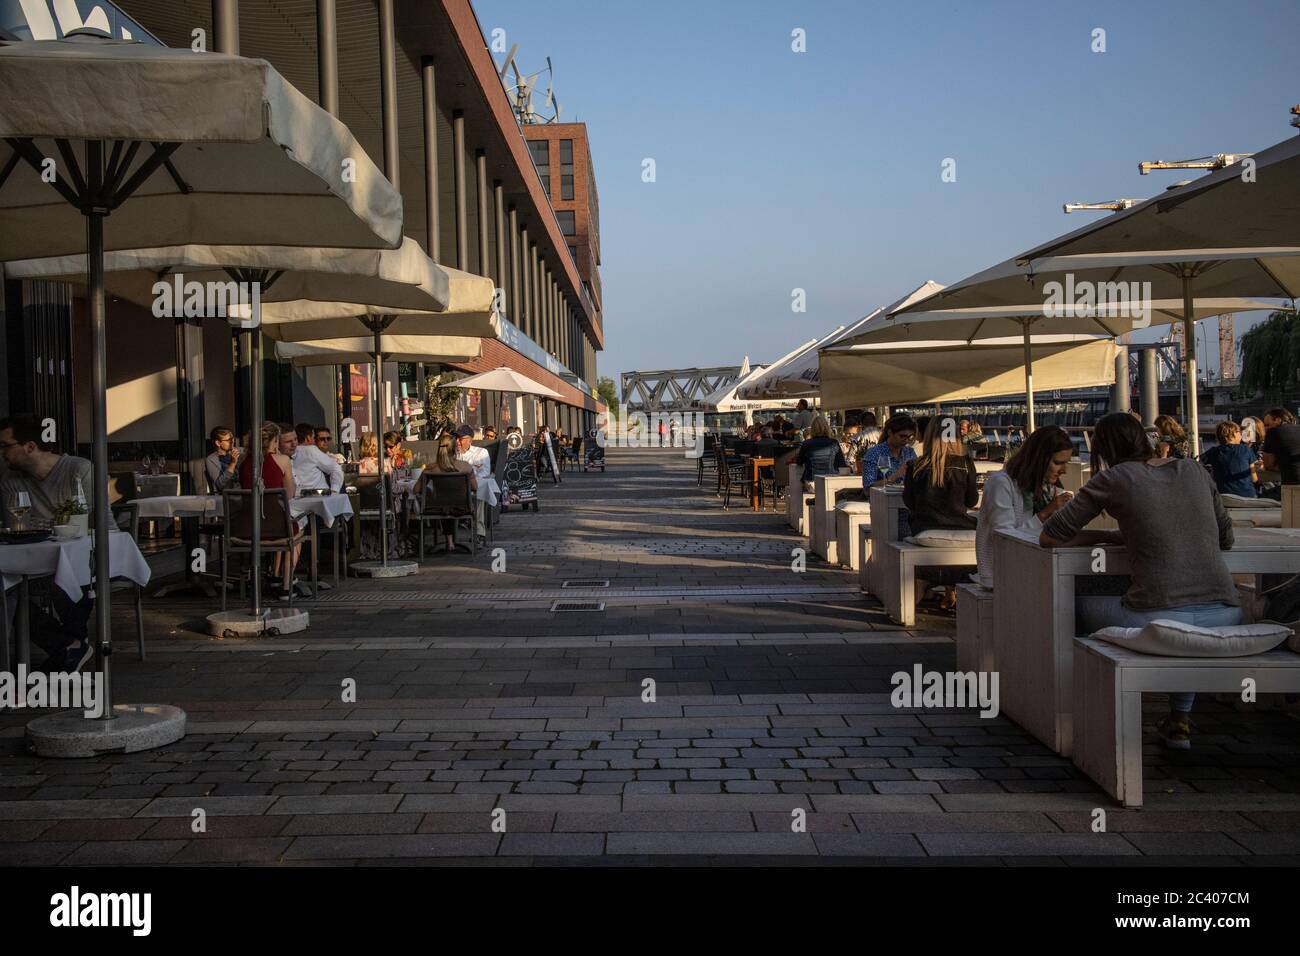 People return to eating at restaurants after the coronavirus pandemic lockdown restrictions are relaxed in Hamburg, Germany Stock Photo